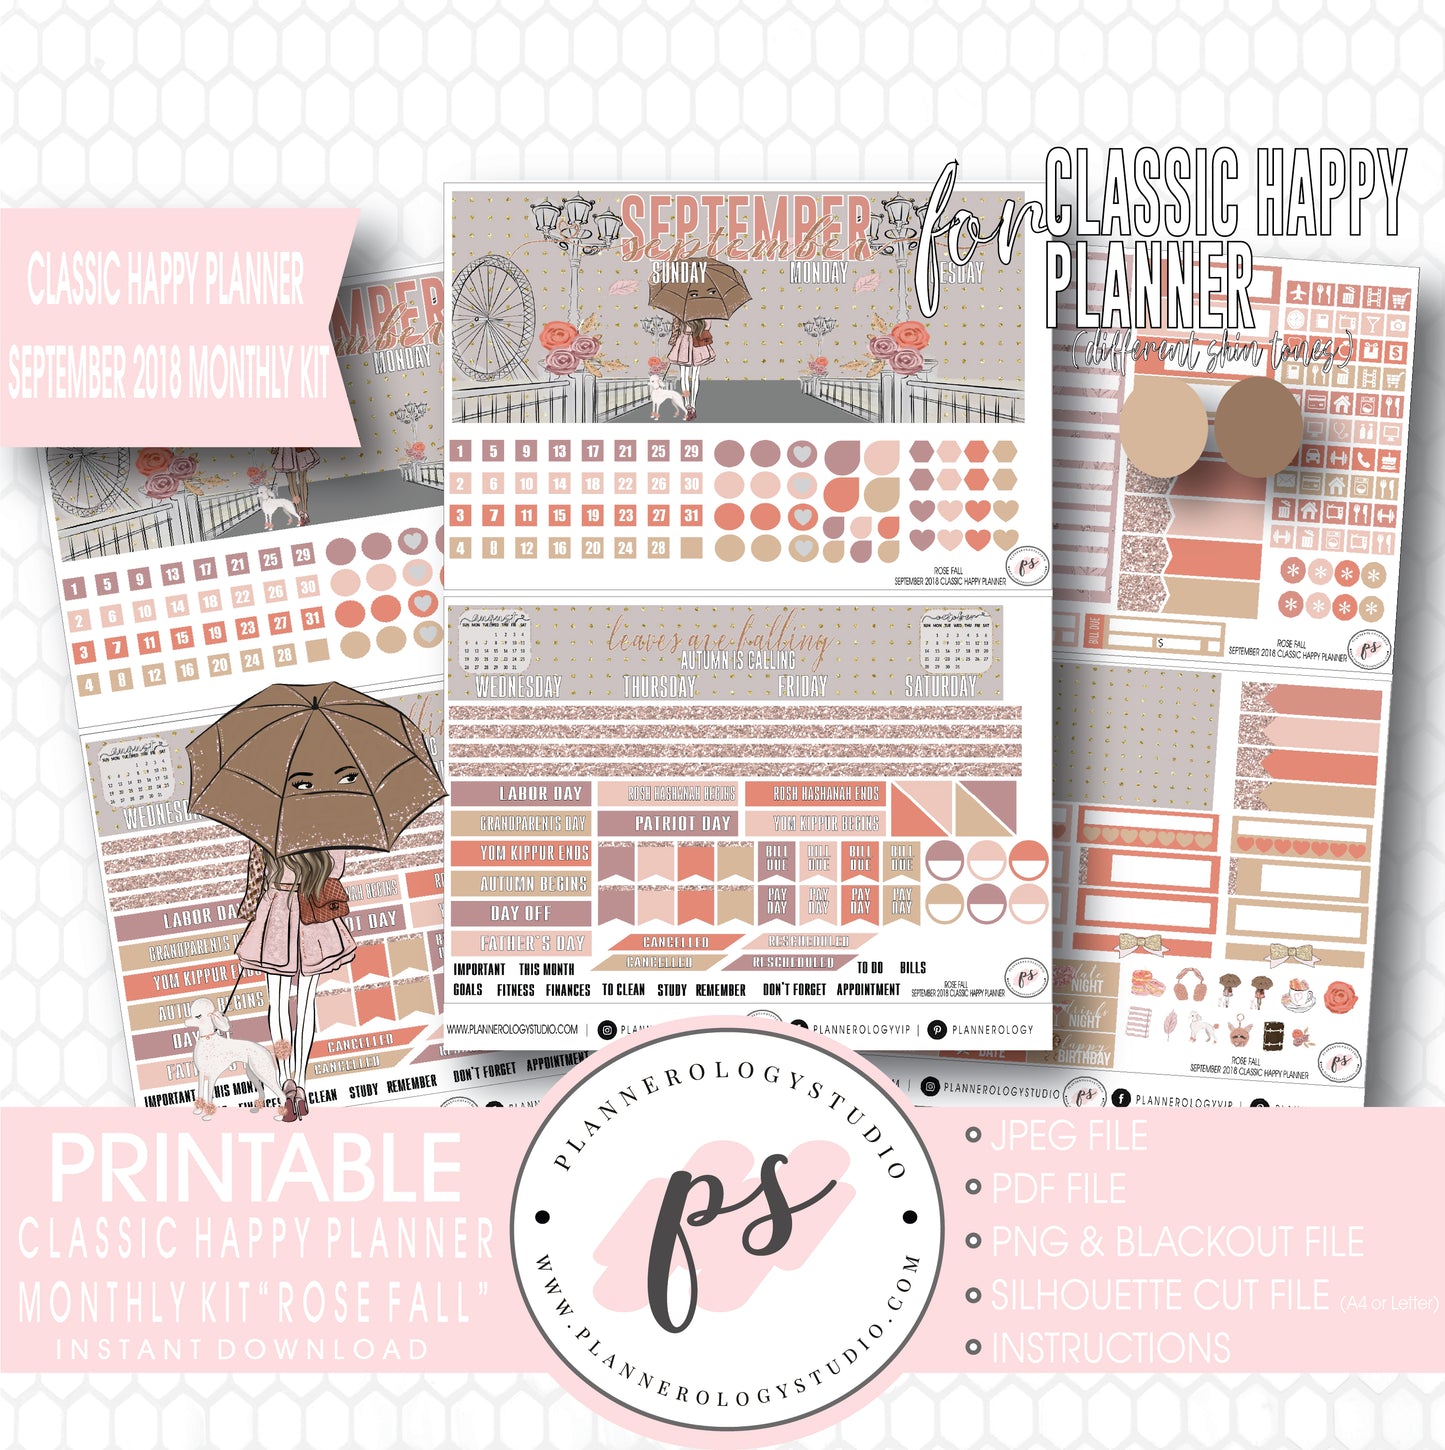 Rose Fall September 2018 Monthly View Kit Digital Printable Planner Stickers (for use with Classic Happy Planner) - Plannerologystudio